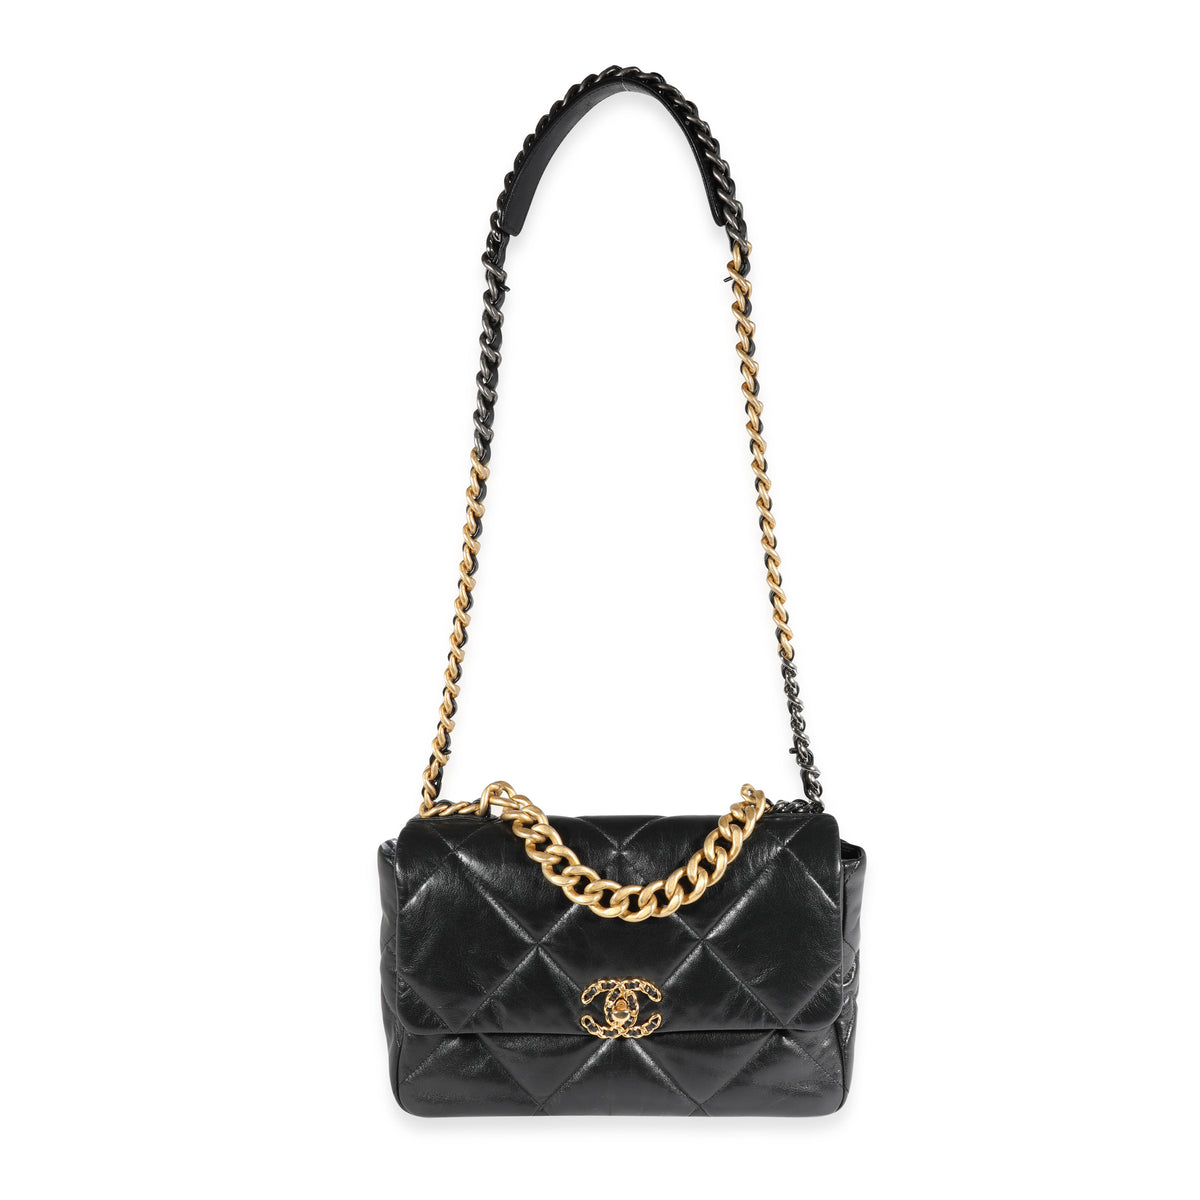 Chanel Black Quilted Lambskin Chanel 19 Large Flap Bag